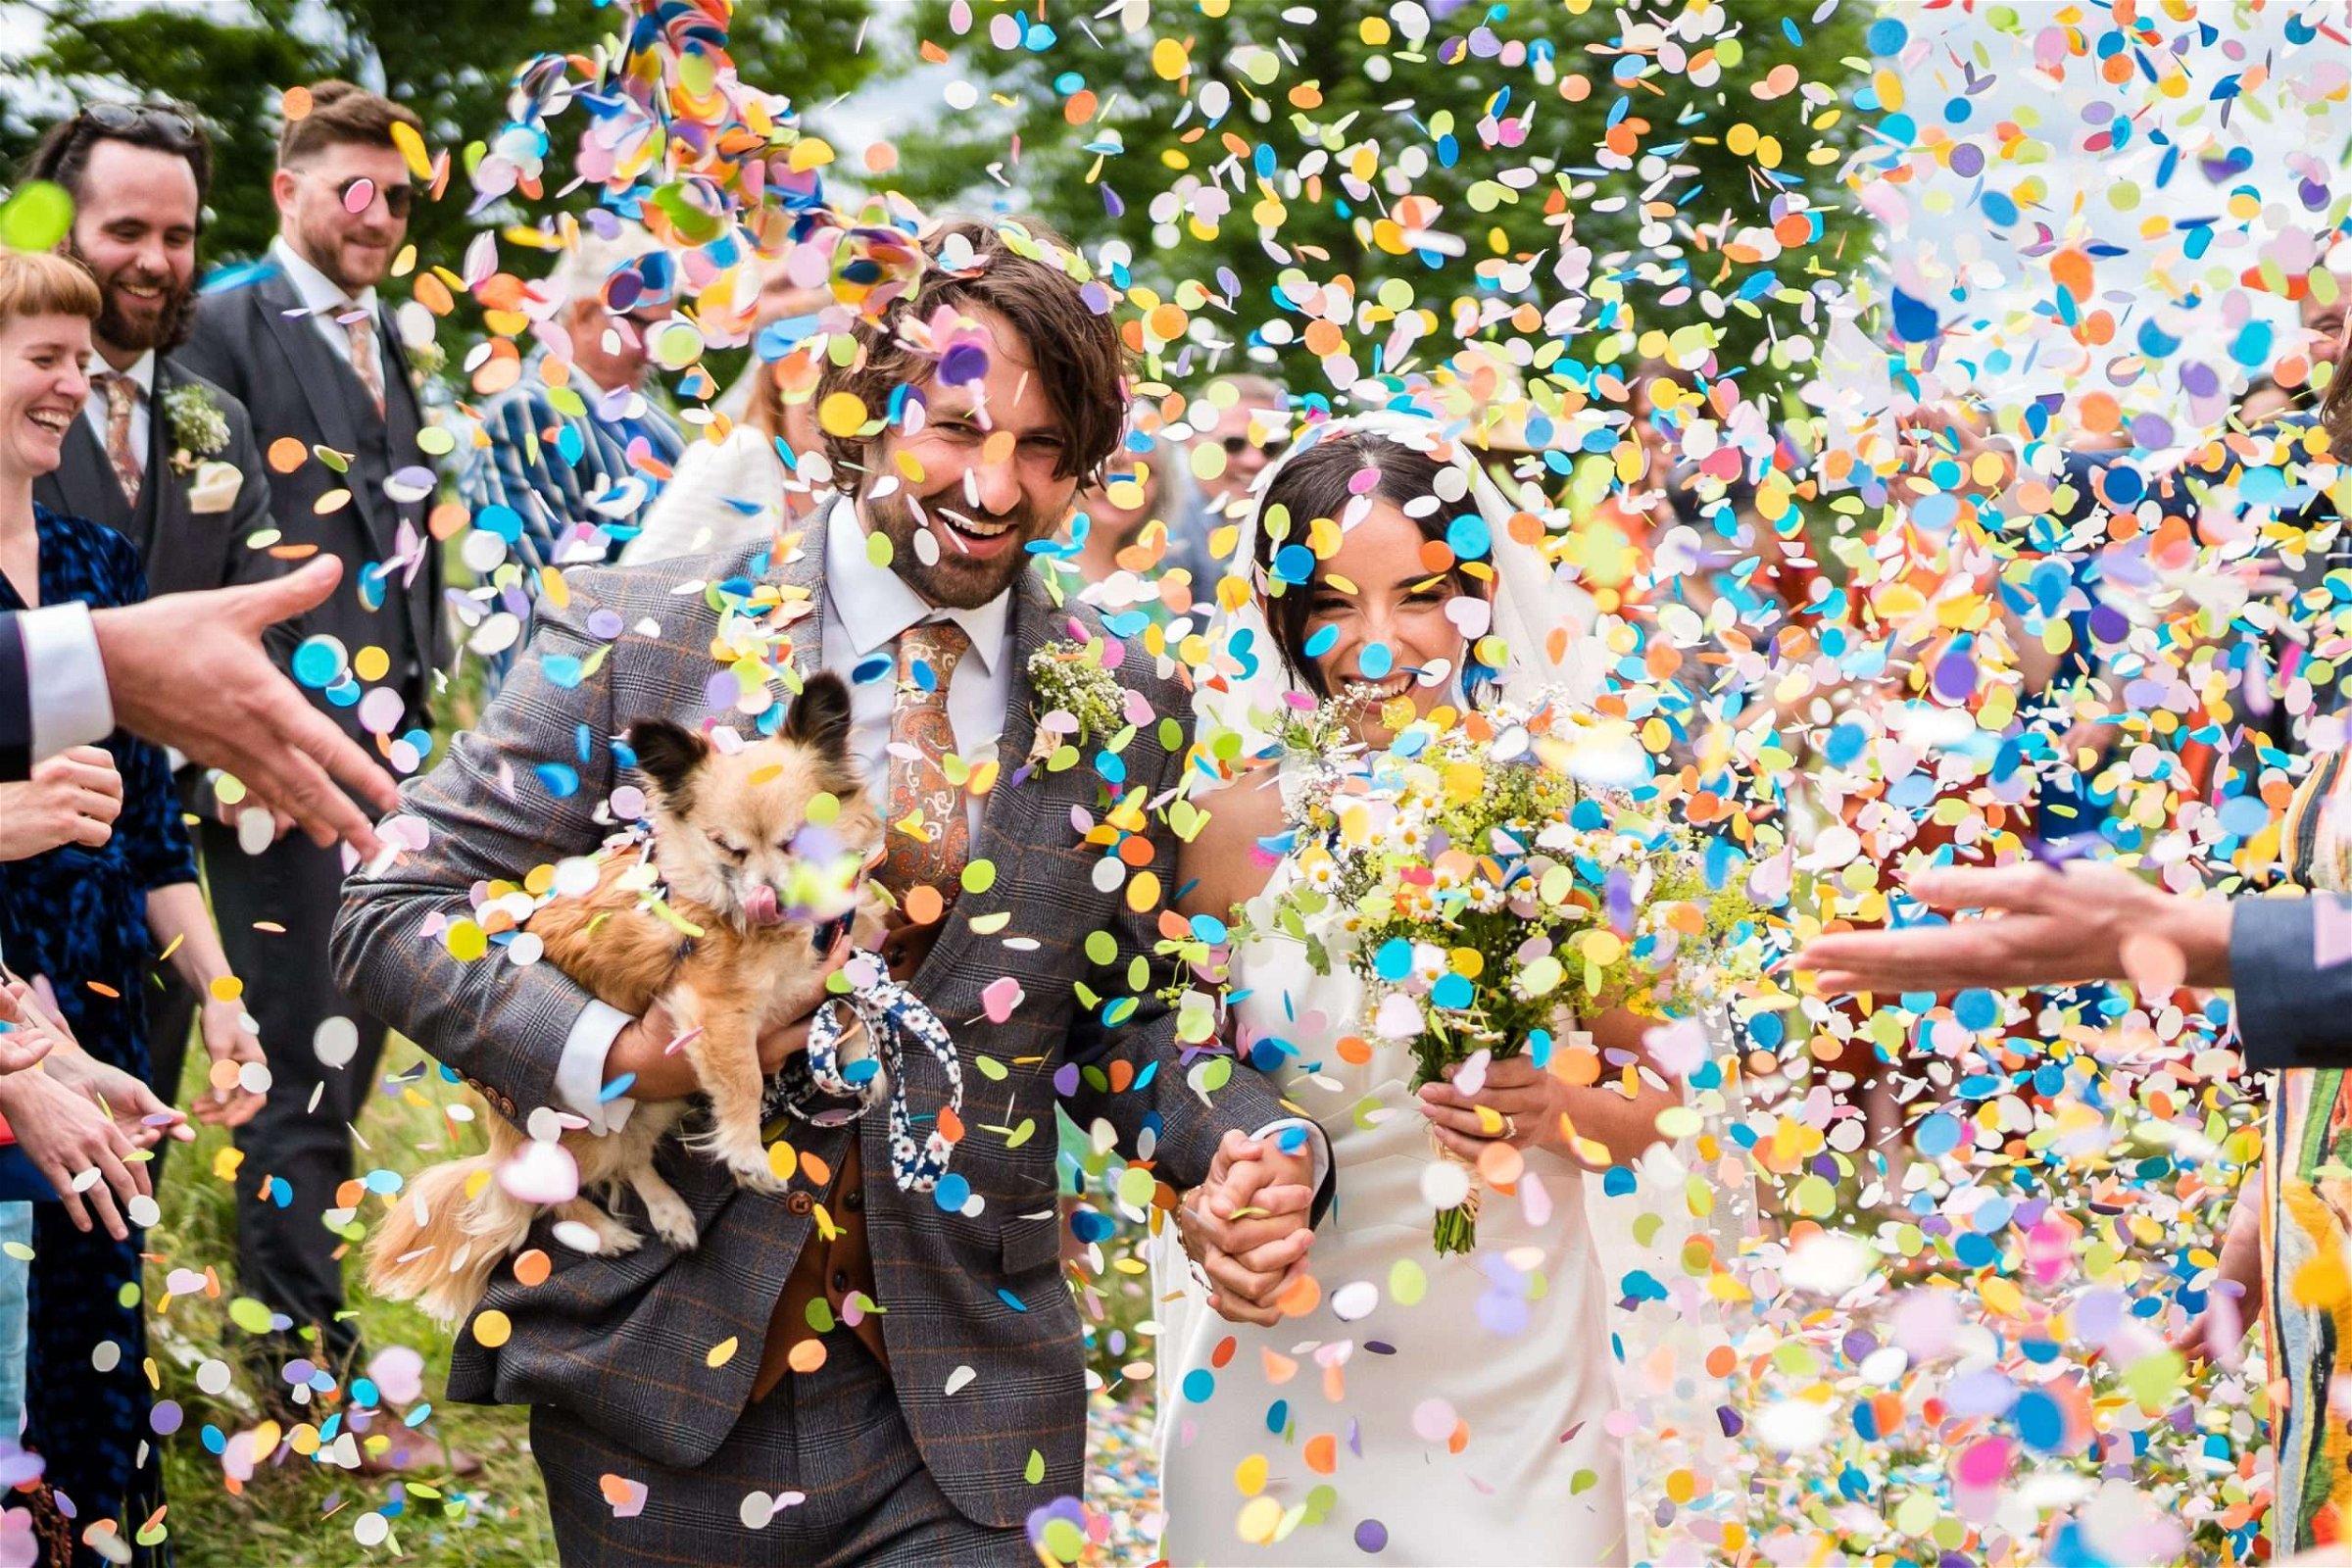 A bride and groom are overwhelmed with bright paper confetti as they leave the church after their ceremony. The groom is holding a small dog and everyone is smiling.